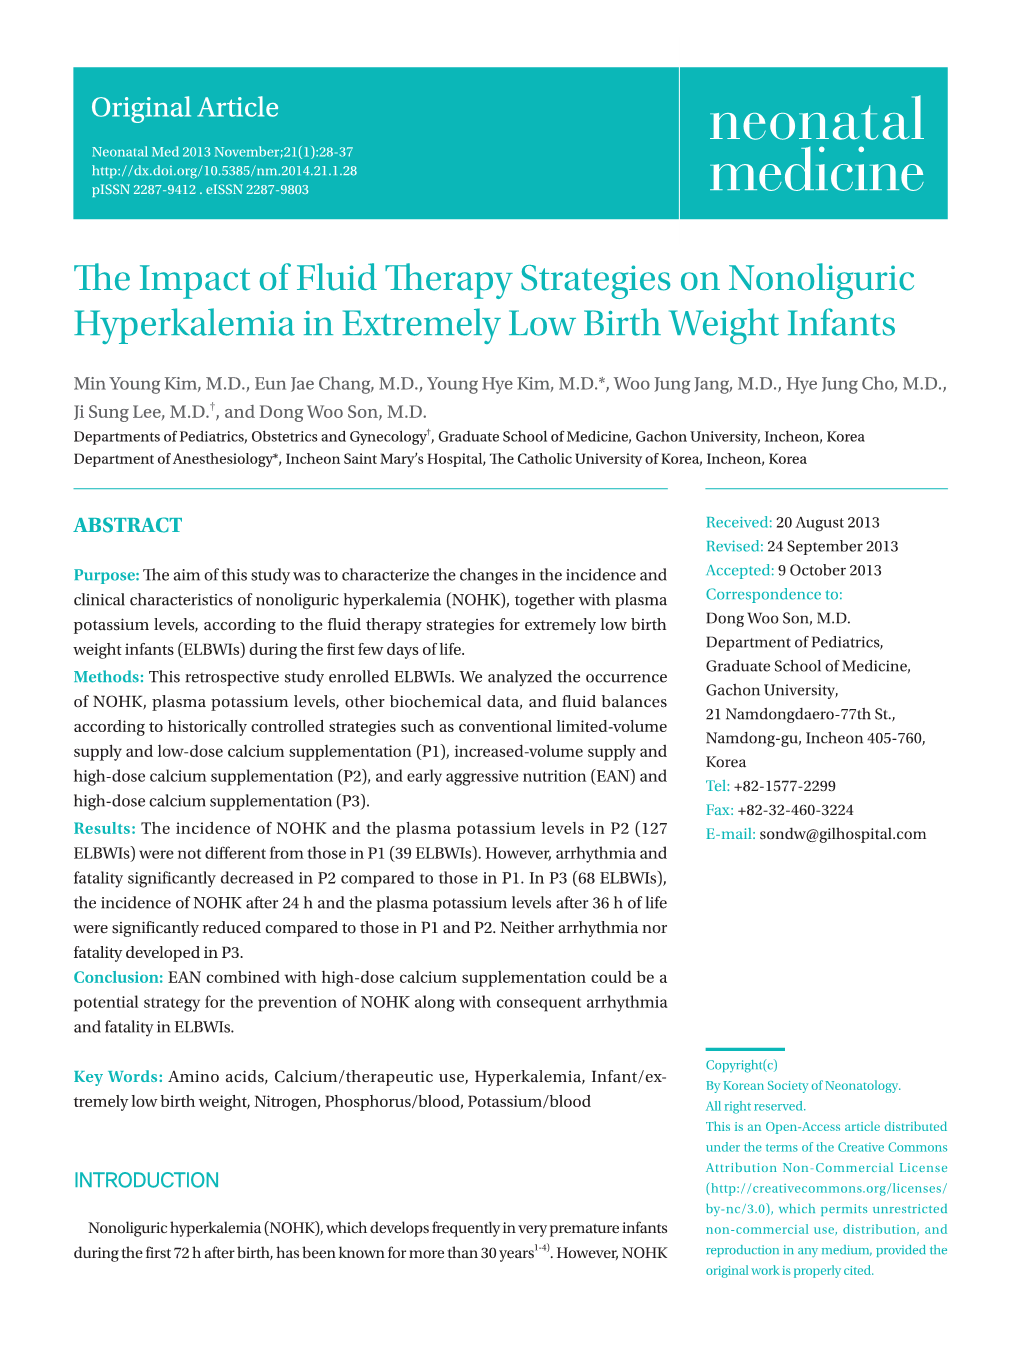 The Impact of Fluid Therapy Strategies on Nonoliguric Hyperkalemia in Extremely Low Birth Weight Infants